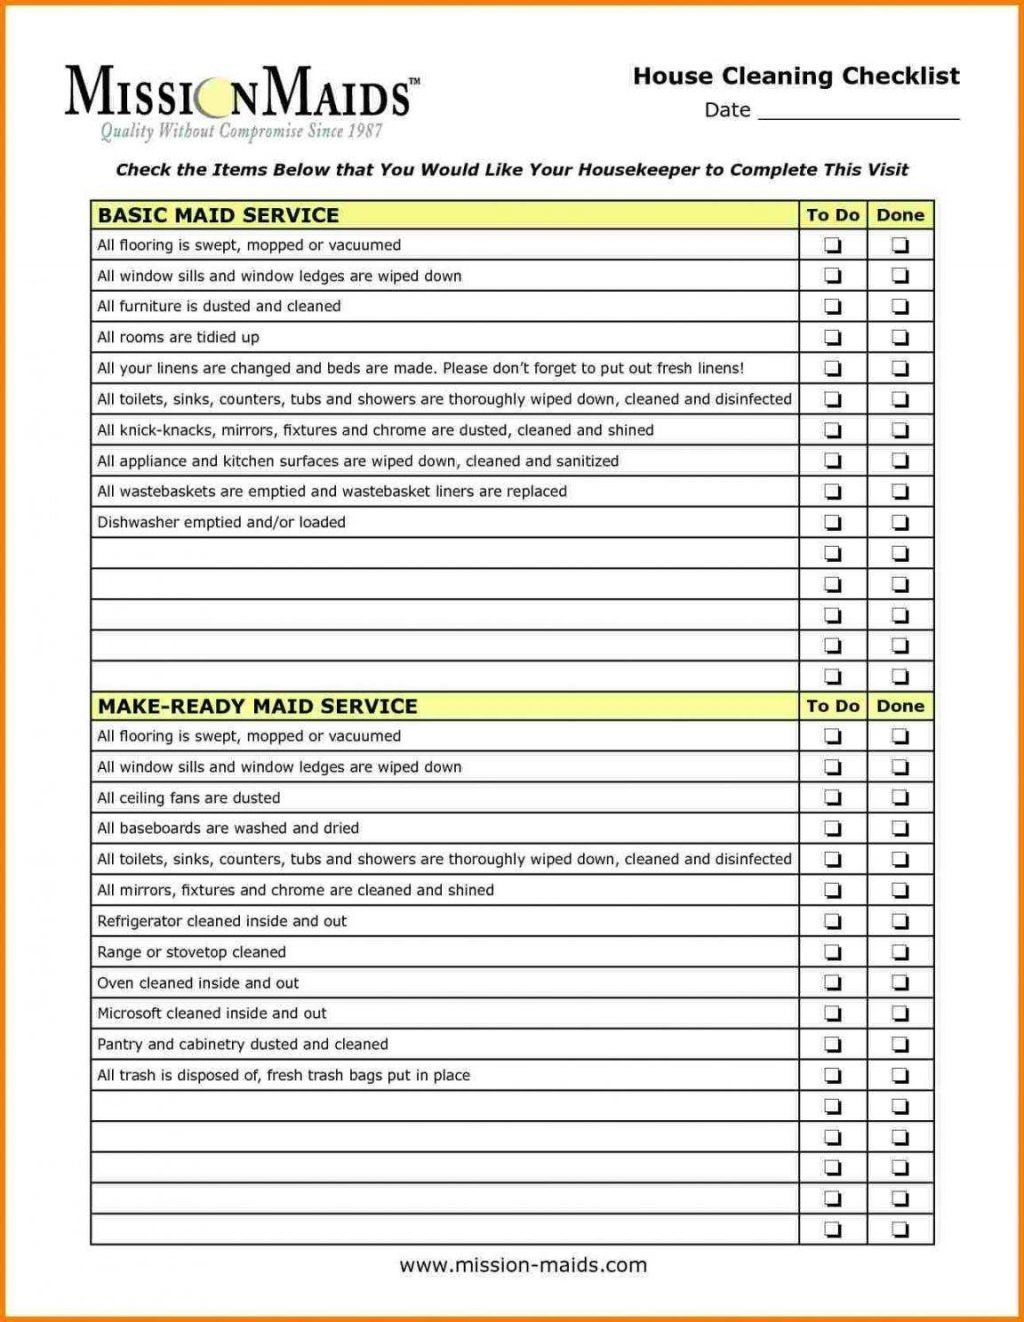 Business Plan The Ultimate House Cleaning Checklist Printable Pdf - Free Printable House Cleaning Checklist For Maid